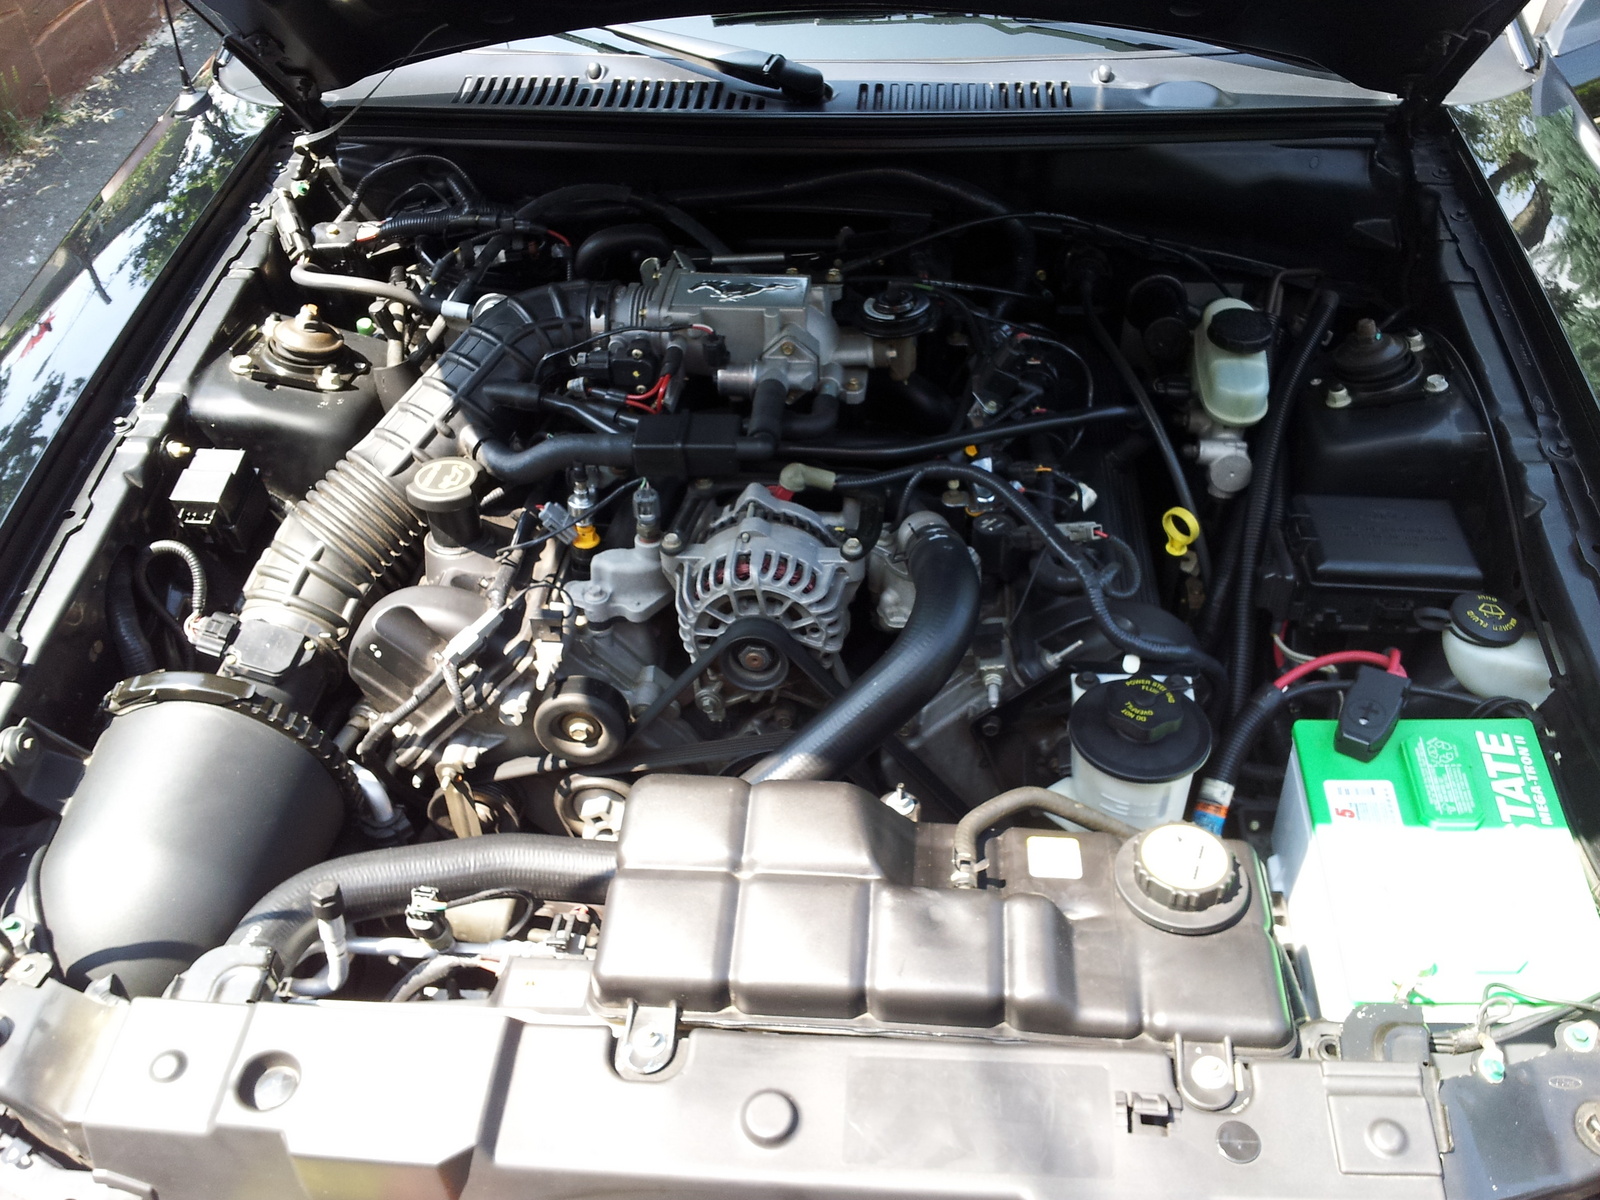 2002 Ford mustang cobra engine specs #8